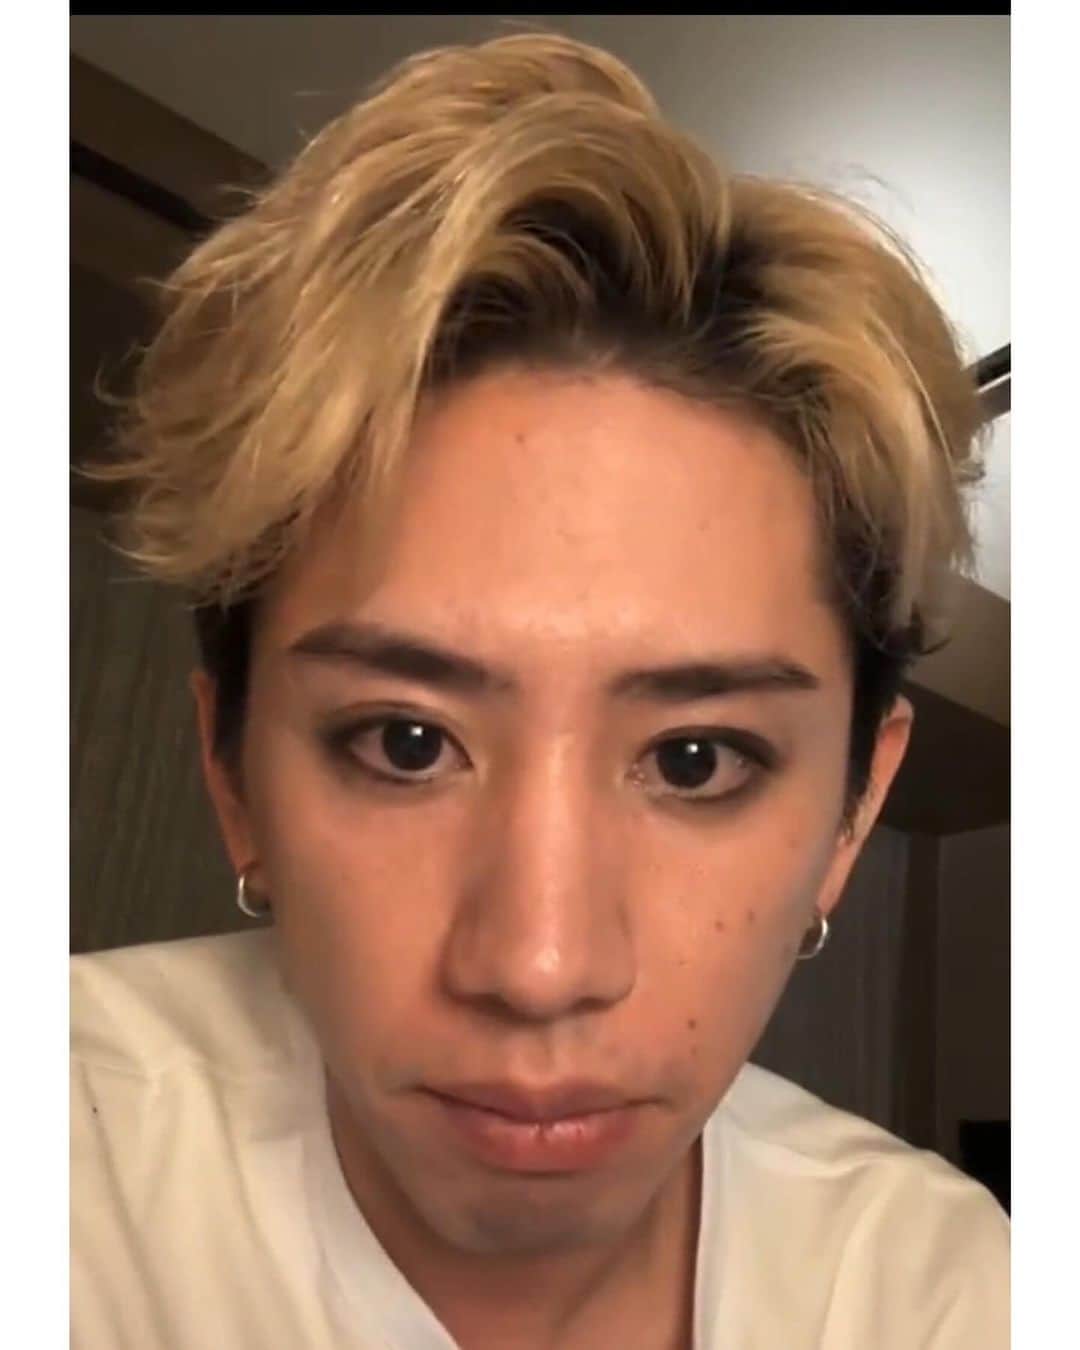 ONE OK ROCK WORLDのインスタグラム：「- ◾️11,25,2023  Insta live,Taka發來的資訊  Taka:上海Day 1因为接收粉丝的横幅引起了安保人员的注意，并收到了警告。这并不是任何人的错，只是每个地方的文化和规则不同，我们应该尊重当地的文化和遵守规矩。我在这里向大家道歉，是我注意的不够。因此，明天将不再接受来自粉丝的横幅，希望大家能互相理解，演出也顺利进行！  They will not be receiving any flags on shanghai day 2 live show due to cultural/event rules and regulation. Taka says it's no one's fault and wants everyone to have a fun and enjoyable time at their live. - #oneokrockofficial #10969taka #toru_10969 #tomo_10969 #ryota_0809 #luxurydisease#luxurydeseaseasiatour2023#shanghai」